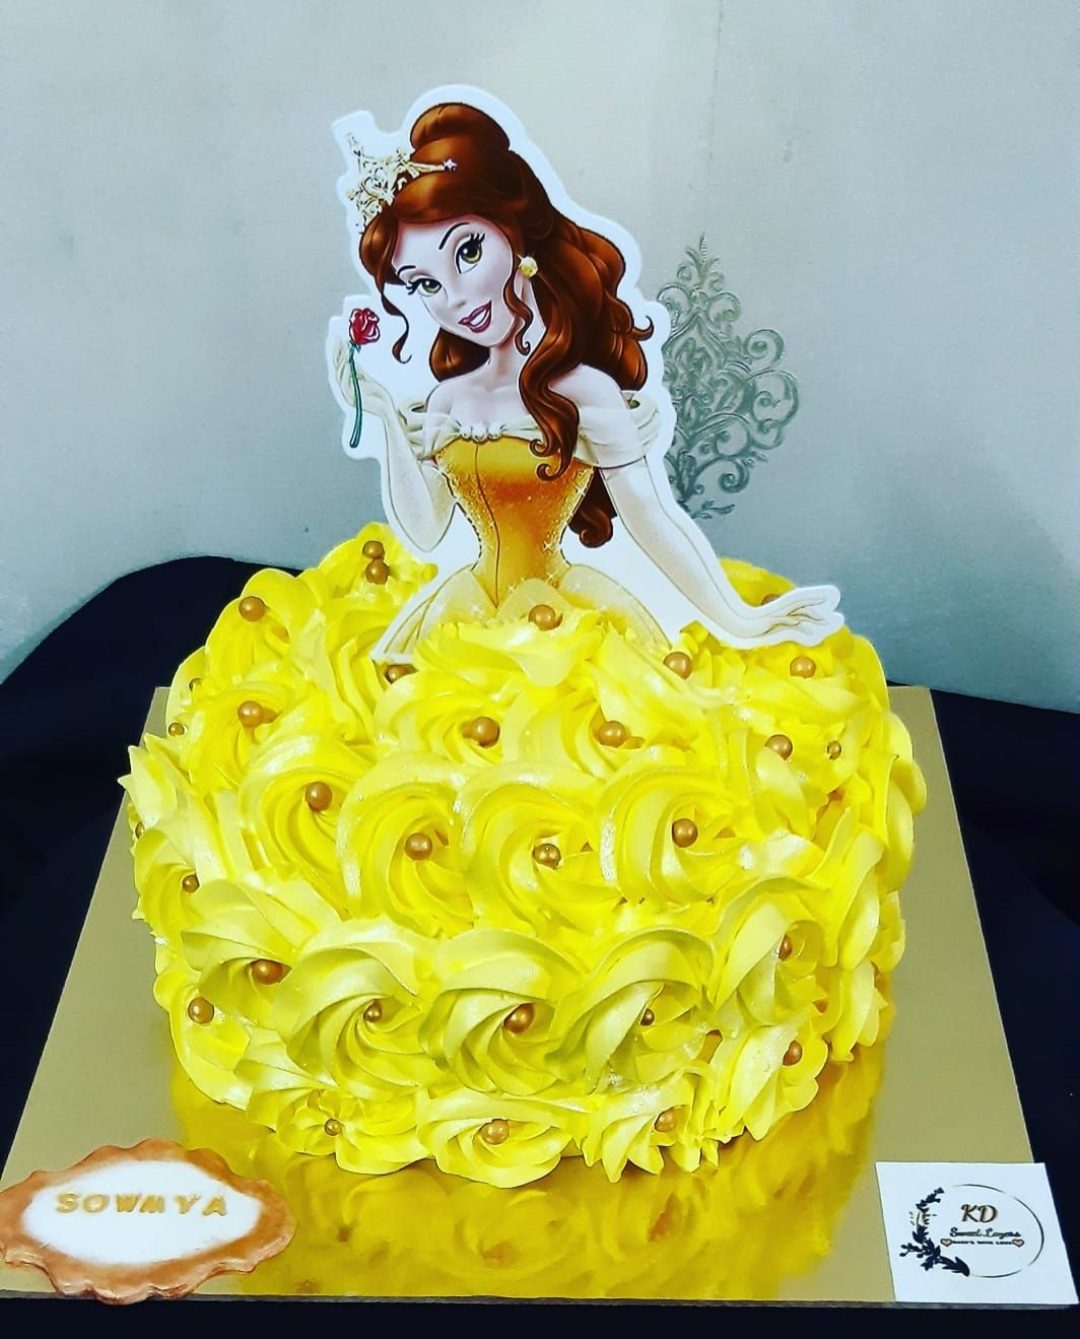 Doll Cake (Belle theme) Designs, Images, Price Near Me